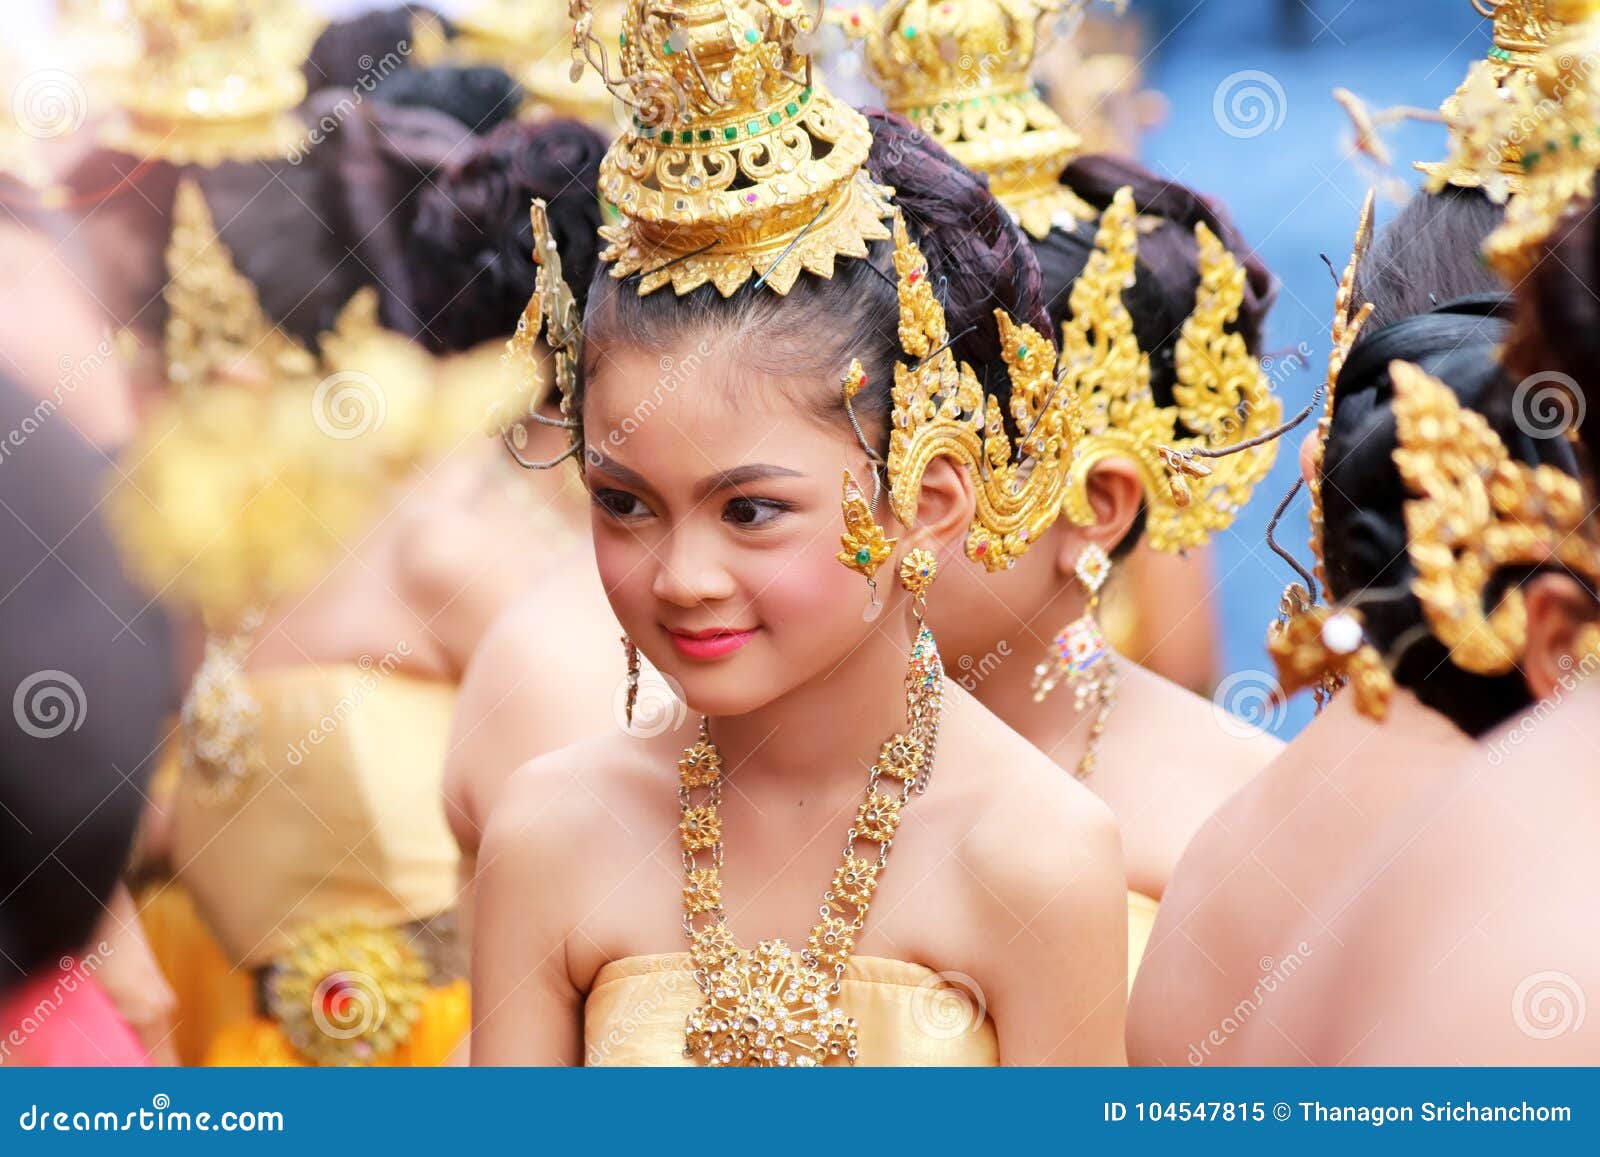 Beautiful Girl Wearing Traditional Thai Costumes Stock Image - Image of ...